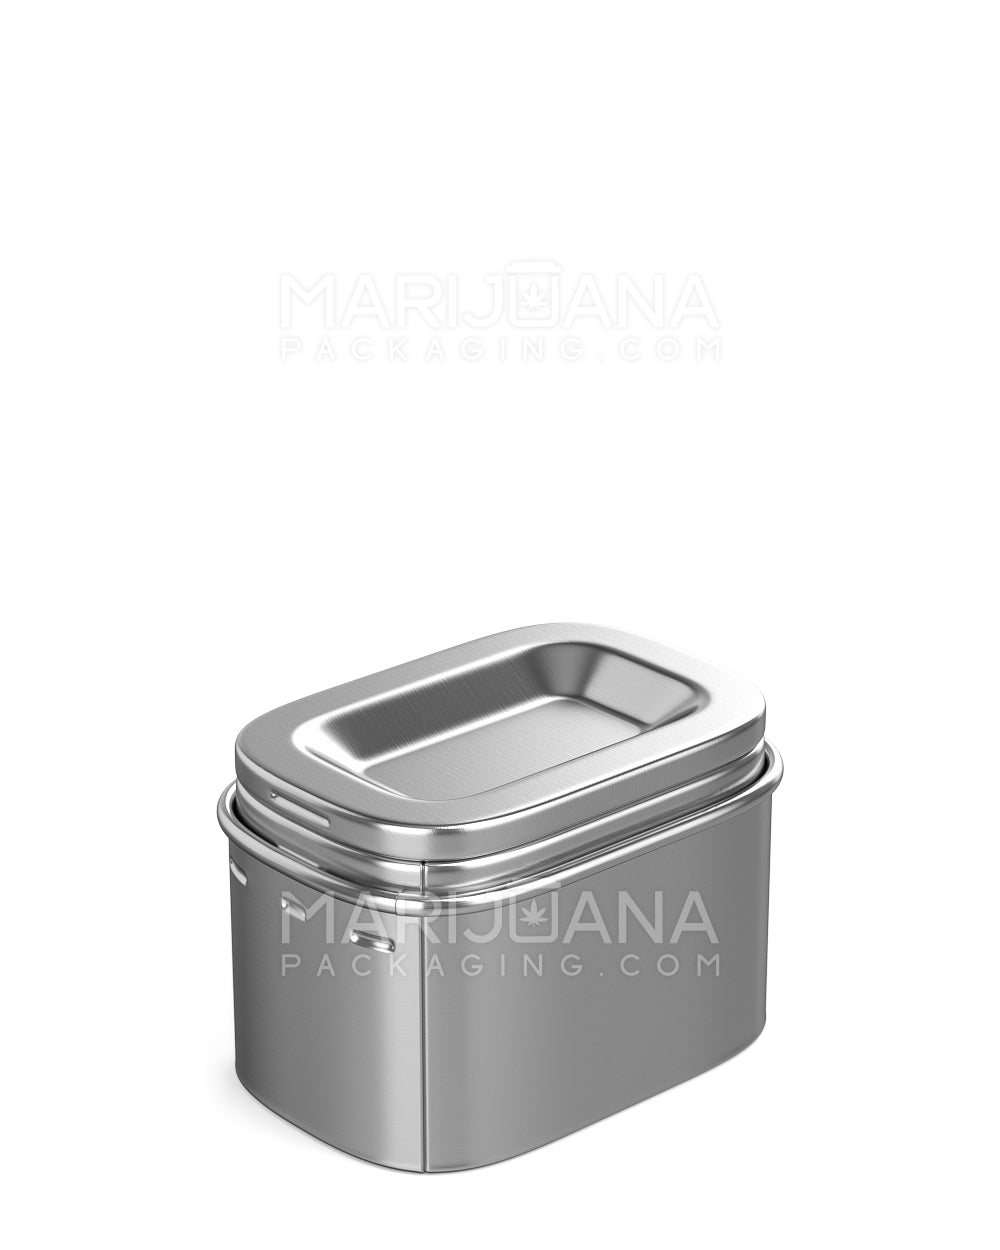 Child Resistant & Sustainable | 100% Recyclable PushTin Small Container | 1oz - Silver Tin - 250 Count - 5